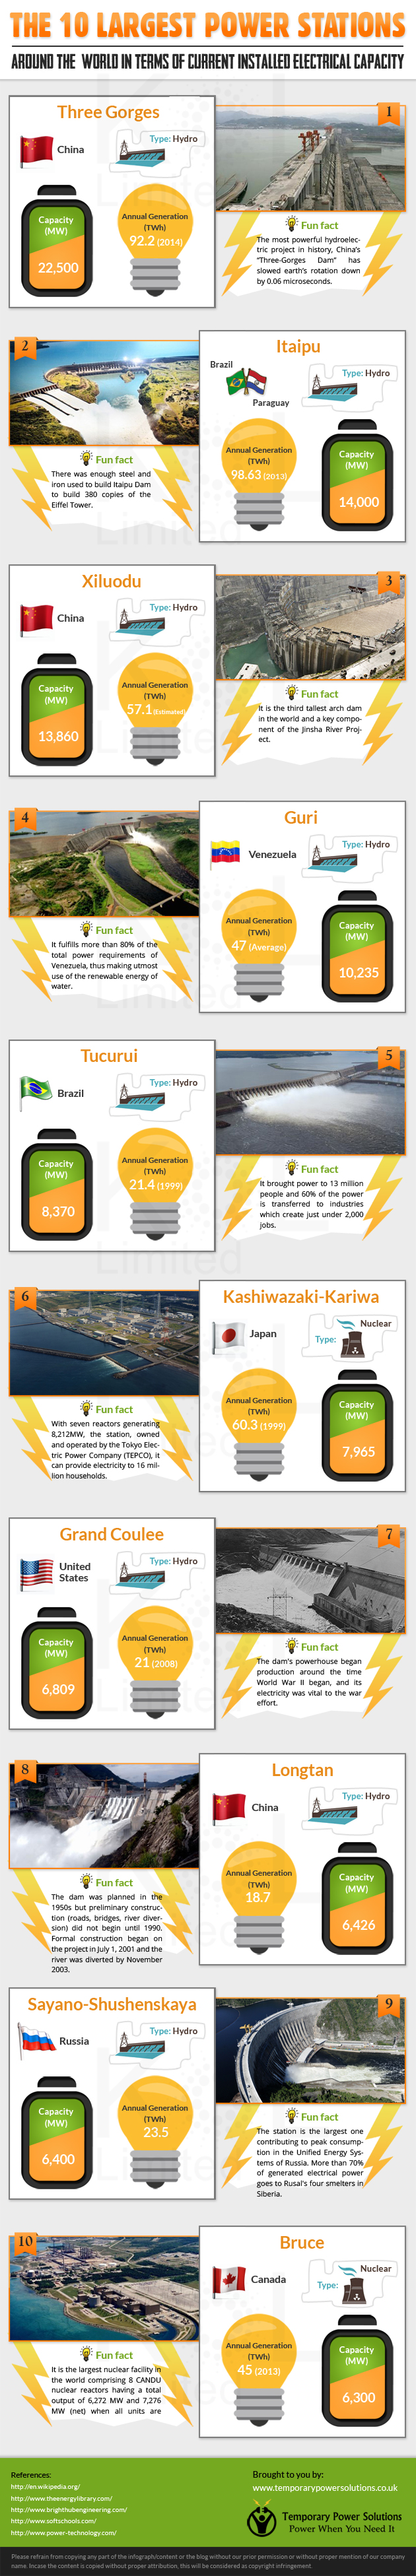 The 10 Largest Power Stations Infographic